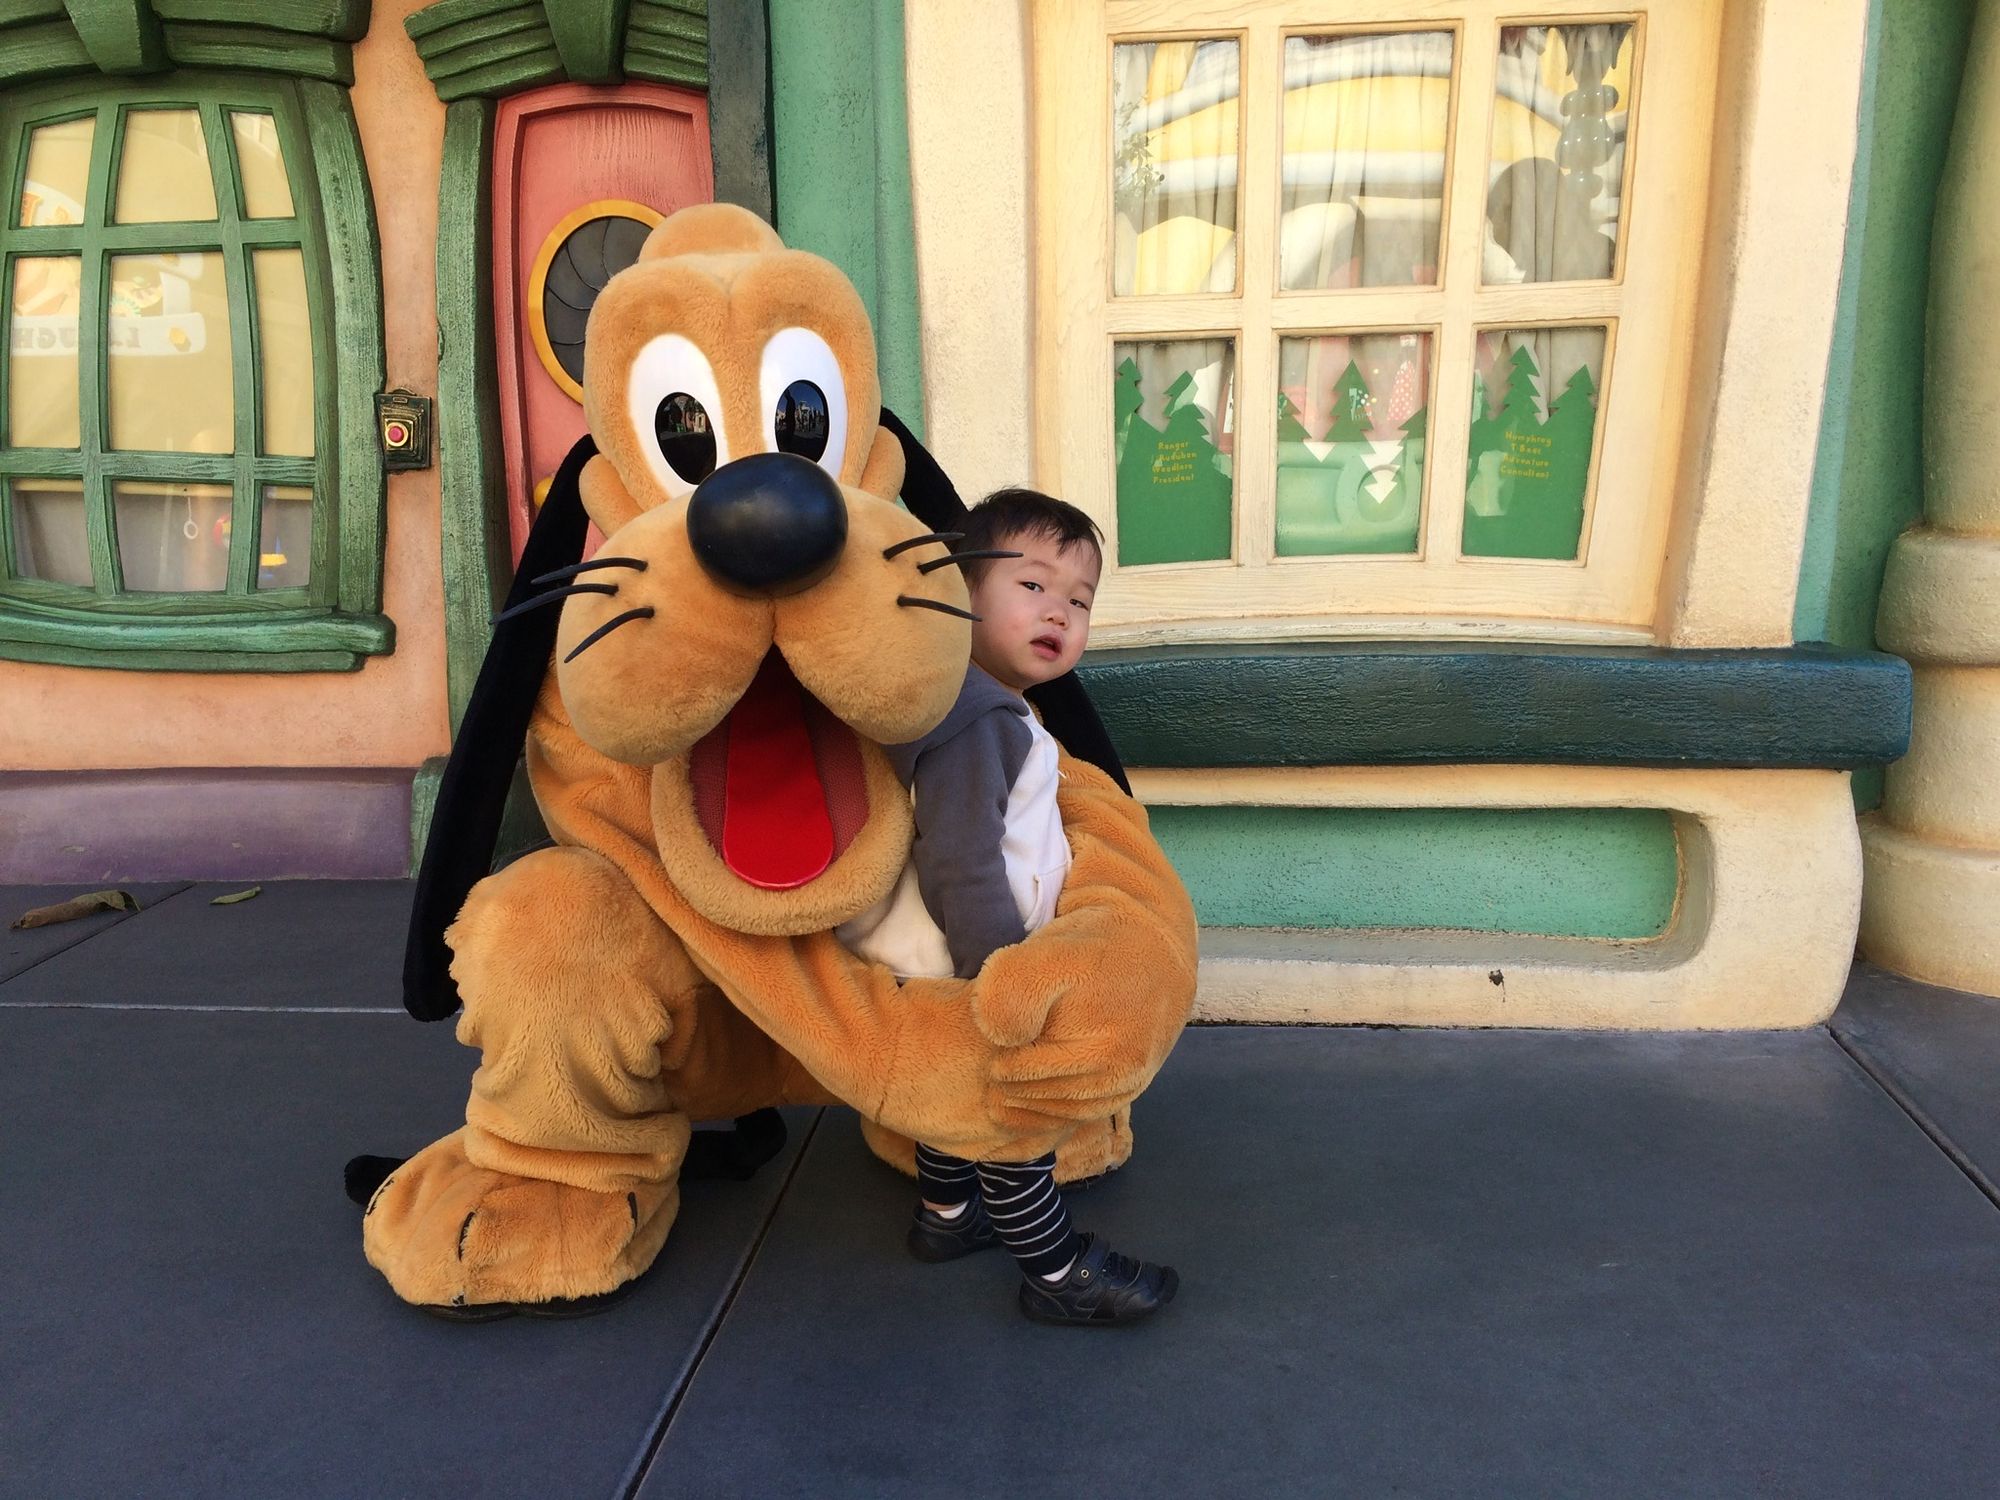 Pluto giving a side-hug to our toddler at Disneyland